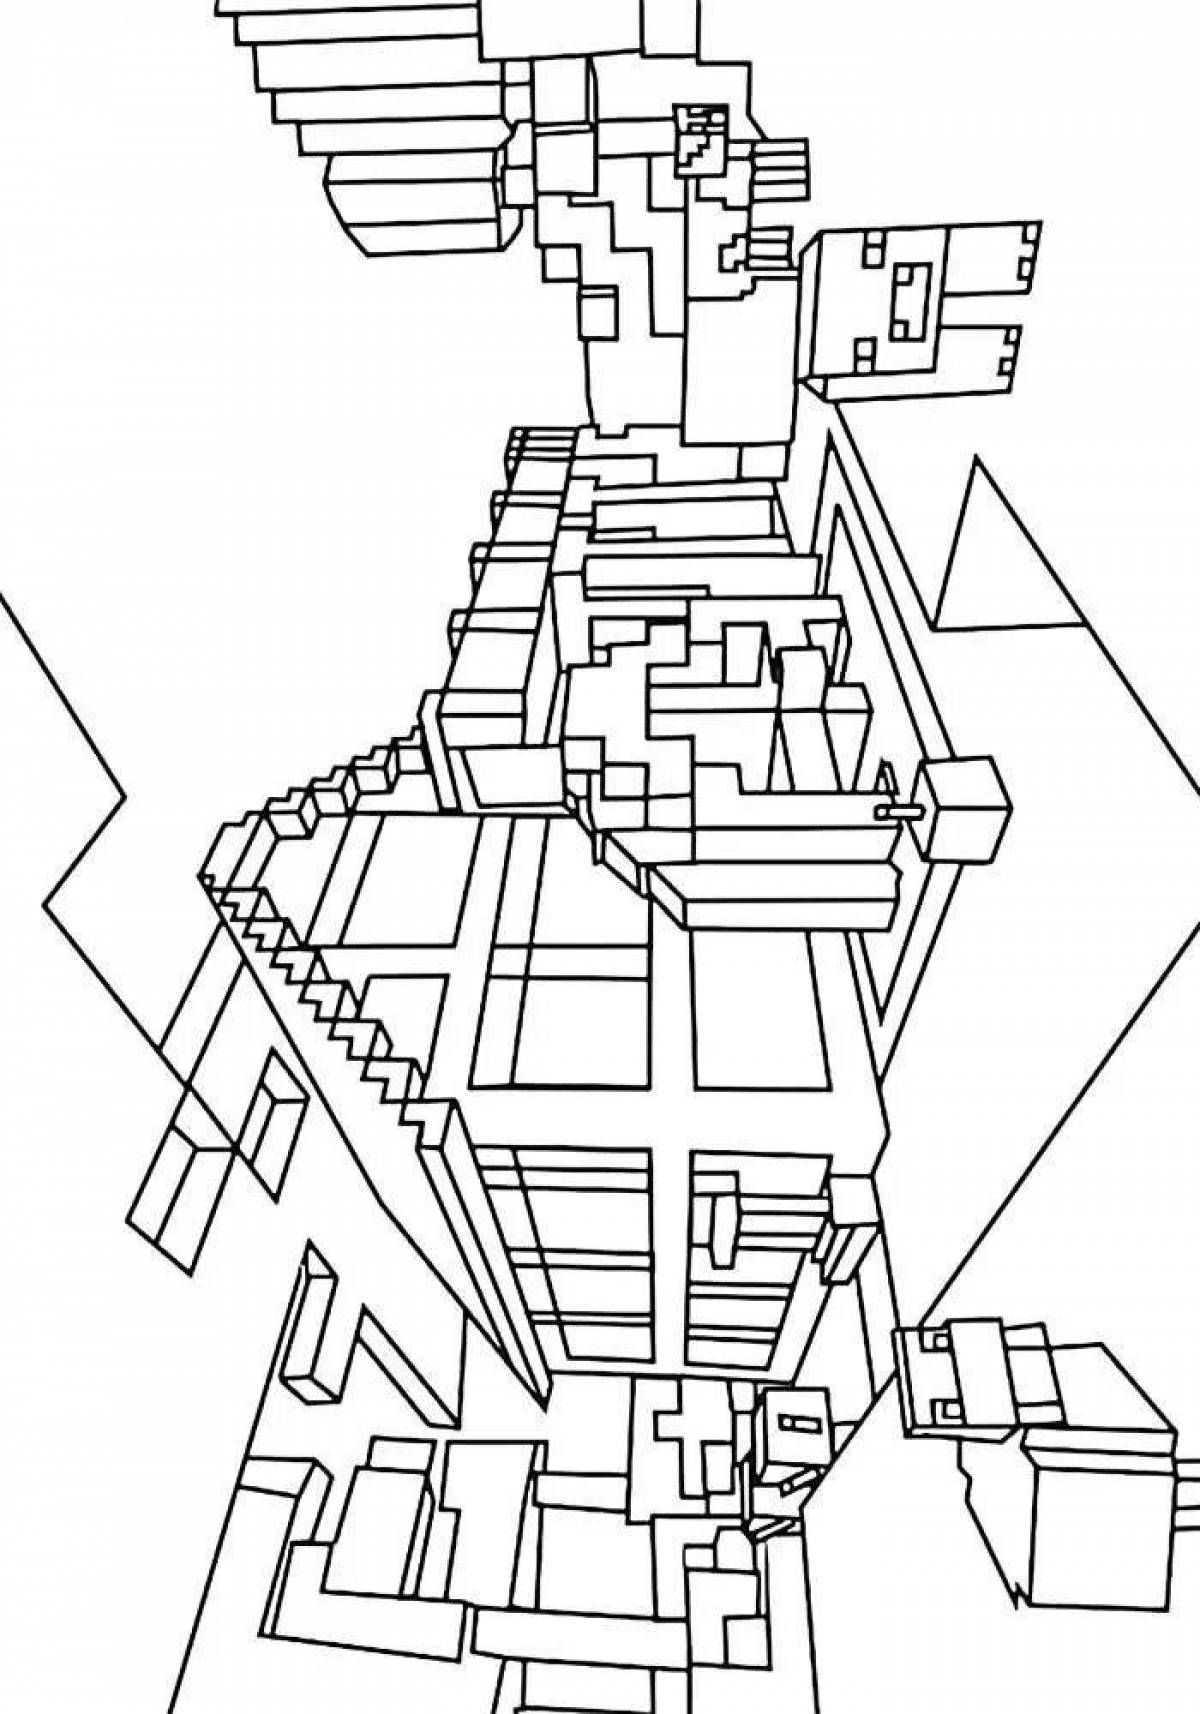 Glorious minecraft city coloring page